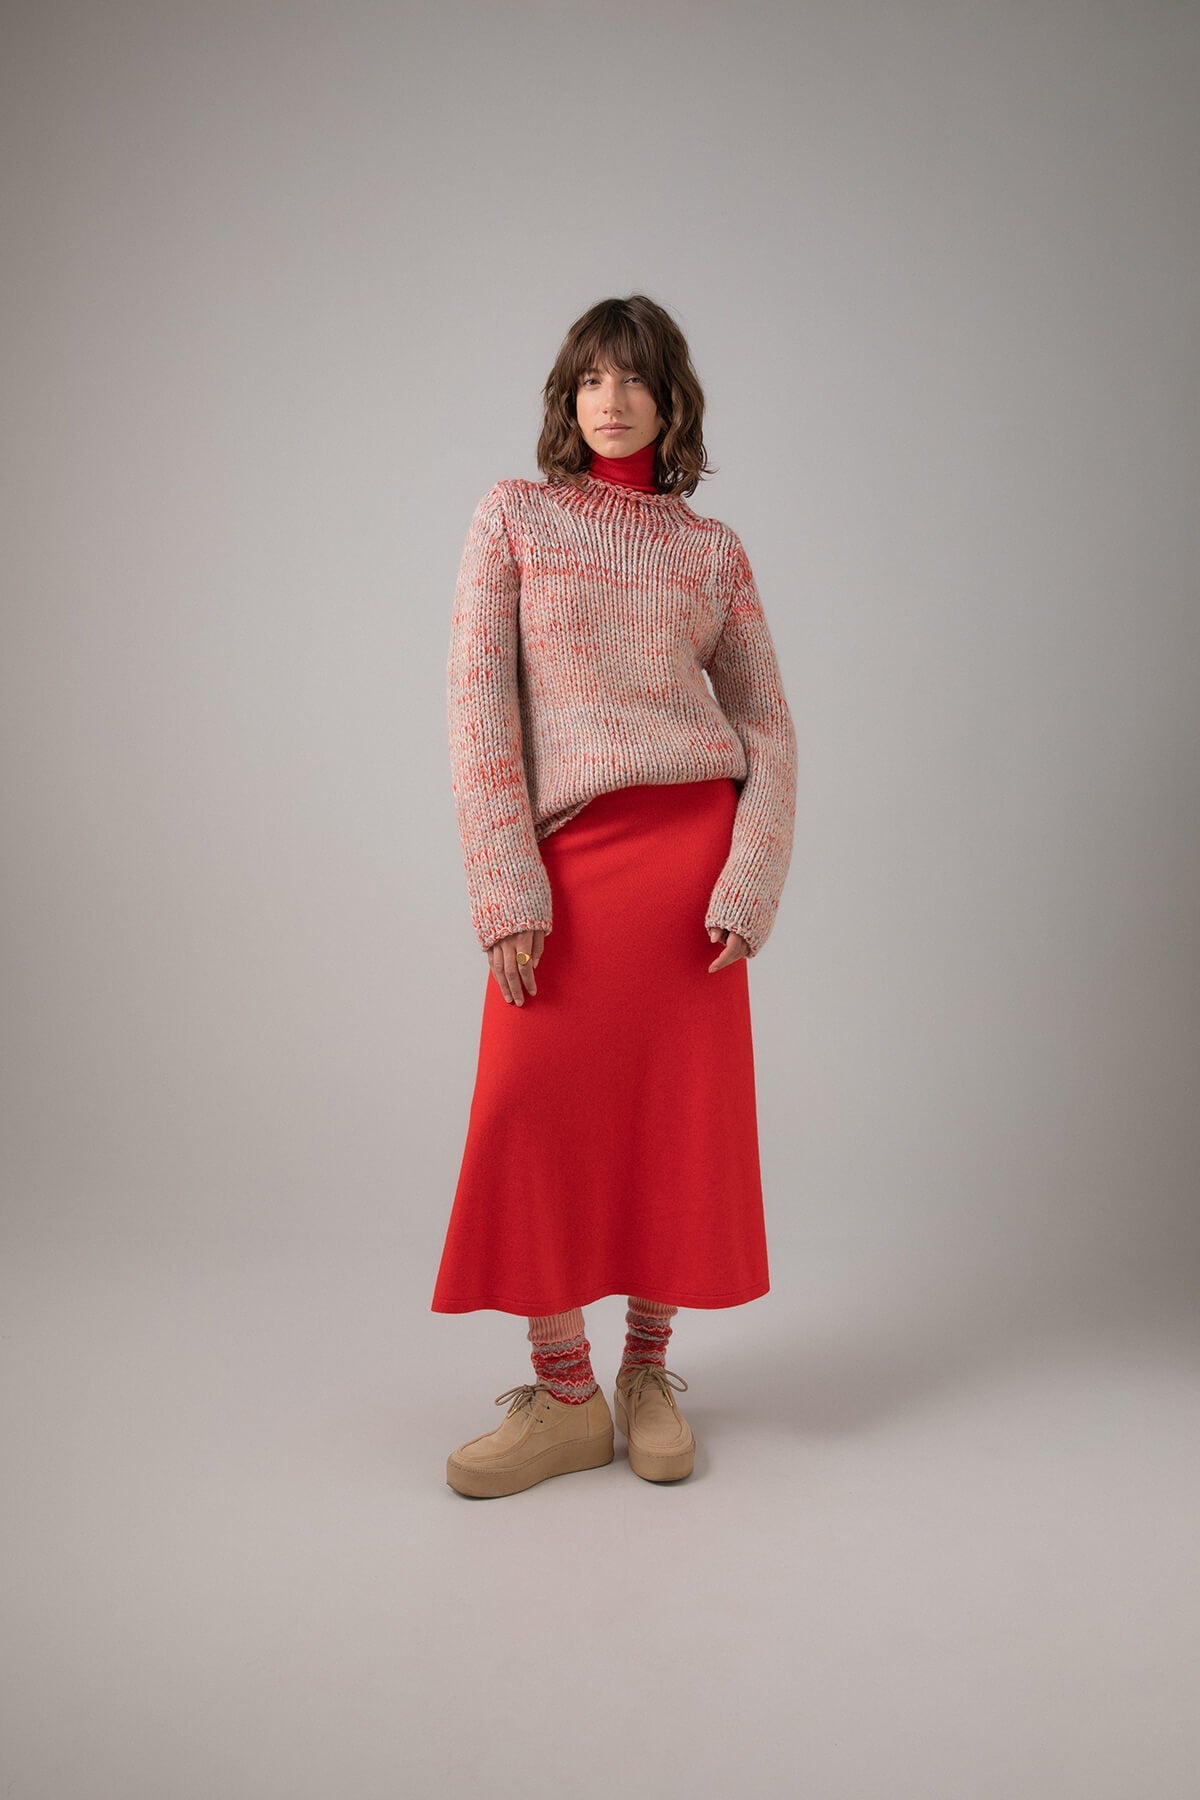 Johnstons of Elgin Women's A-Line Cashmere Skirt in Orkney Red worn with a Red Marl Cashmere Neck Sweater on a grey background KAP05097SE0661